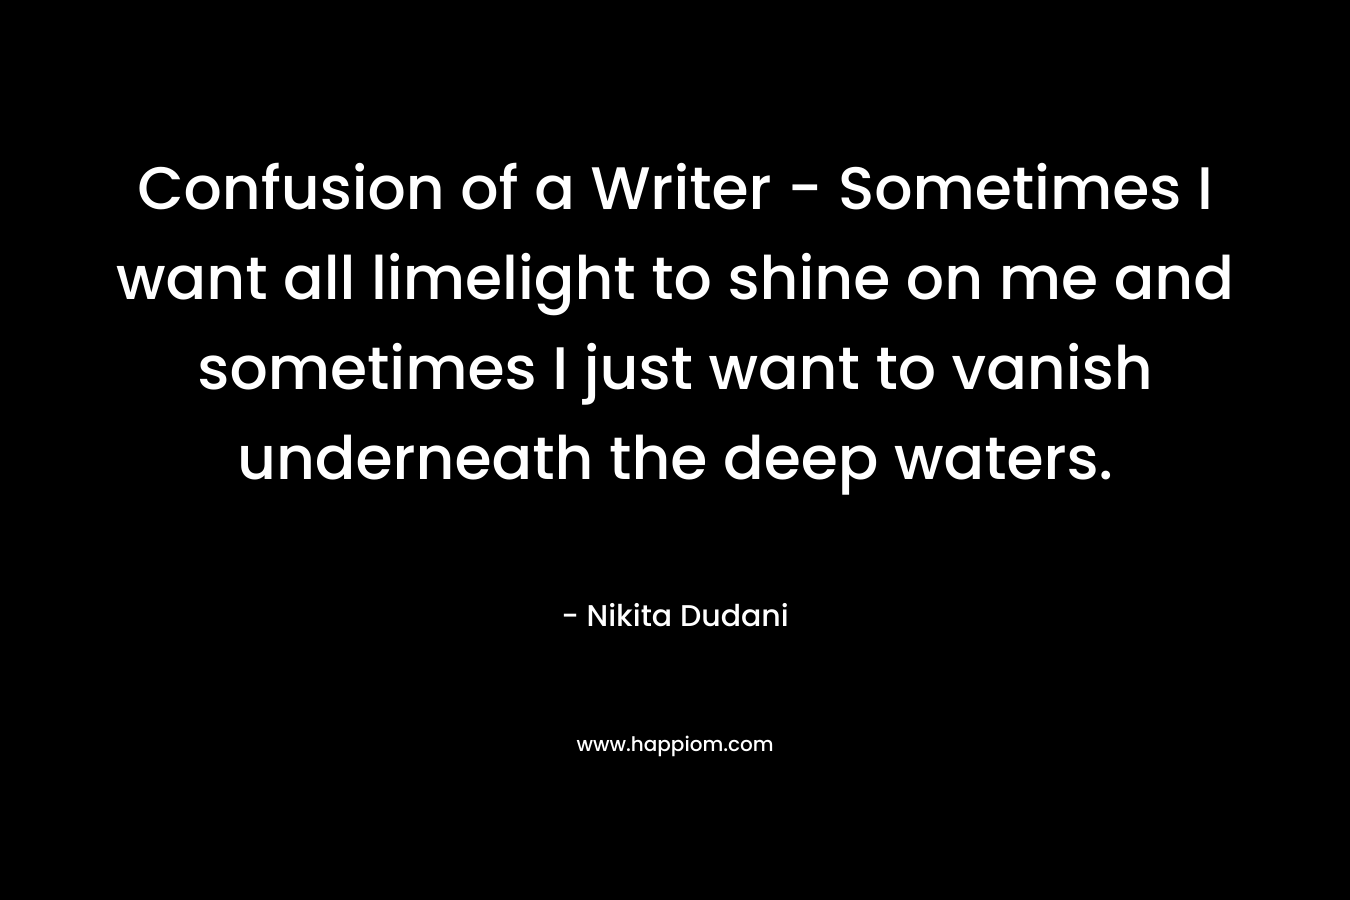 Confusion of a Writer – Sometimes I want all limelight to shine on me and sometimes I just want to vanish underneath the deep waters. – Nikita Dudani